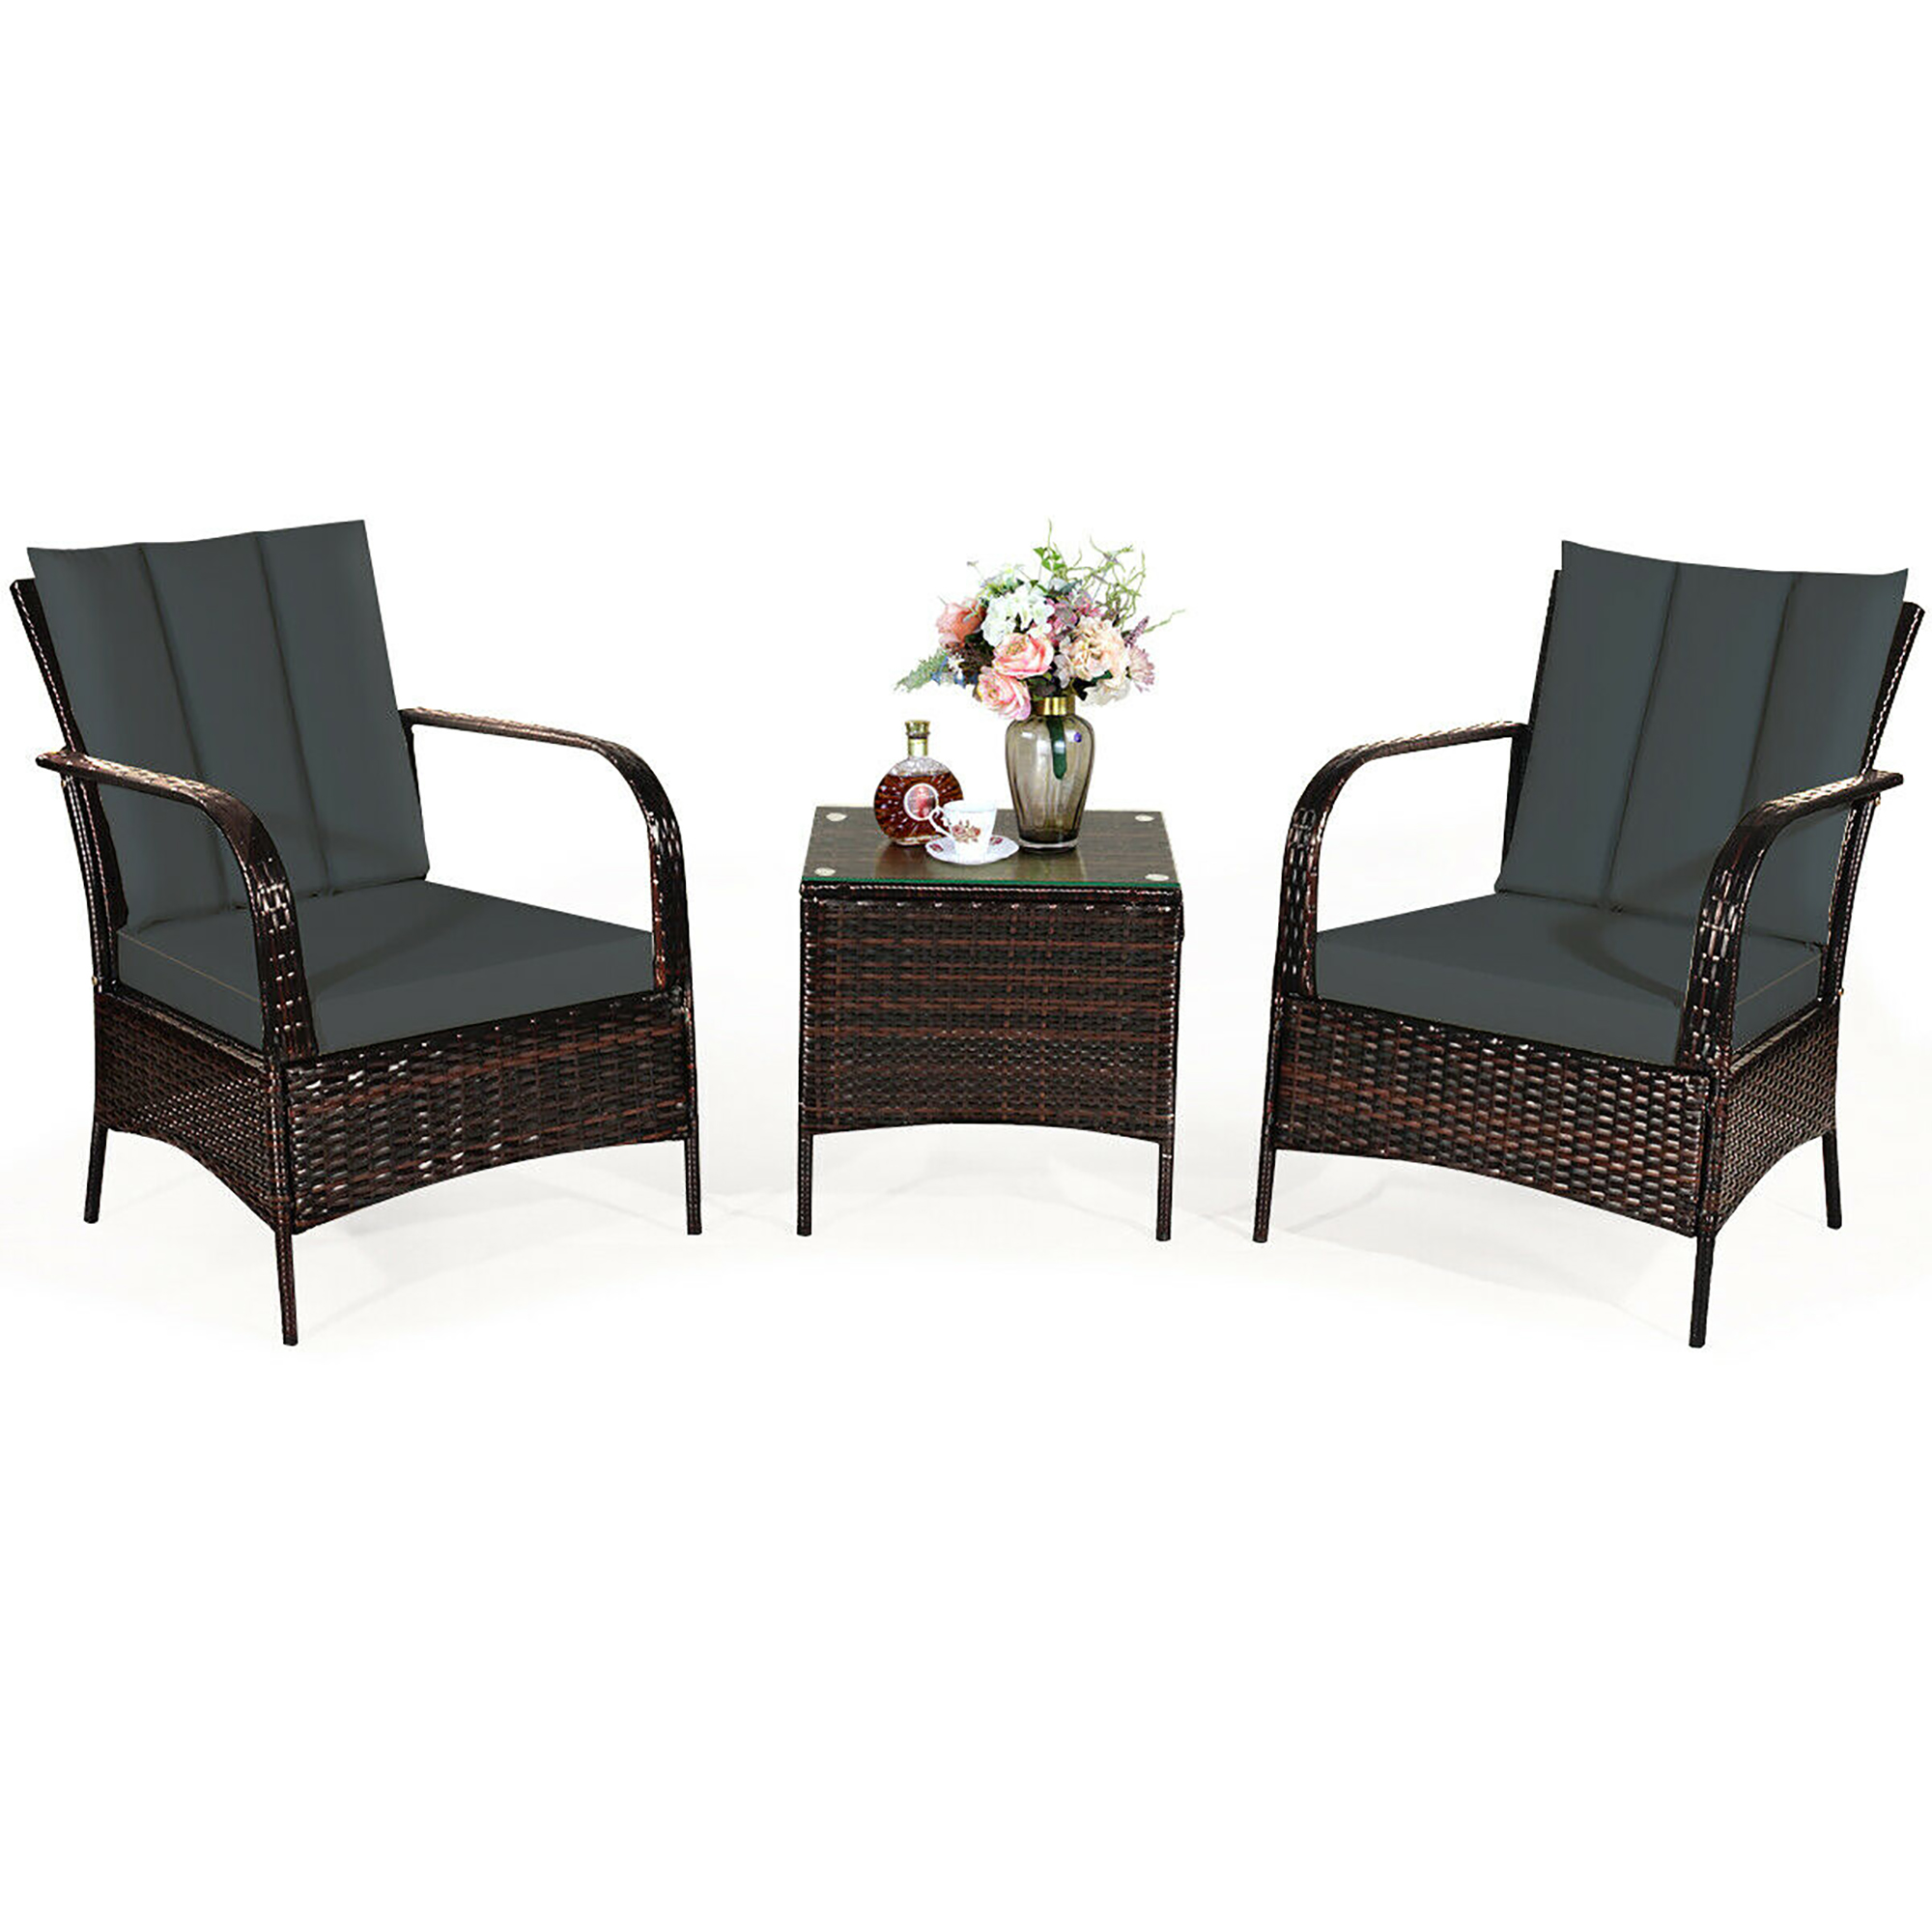 Costway 3 PCS Patio Rattan Furniture Set Coffee Table & 2 Rattan Chair W/Gray Cushions - image 2 of 10